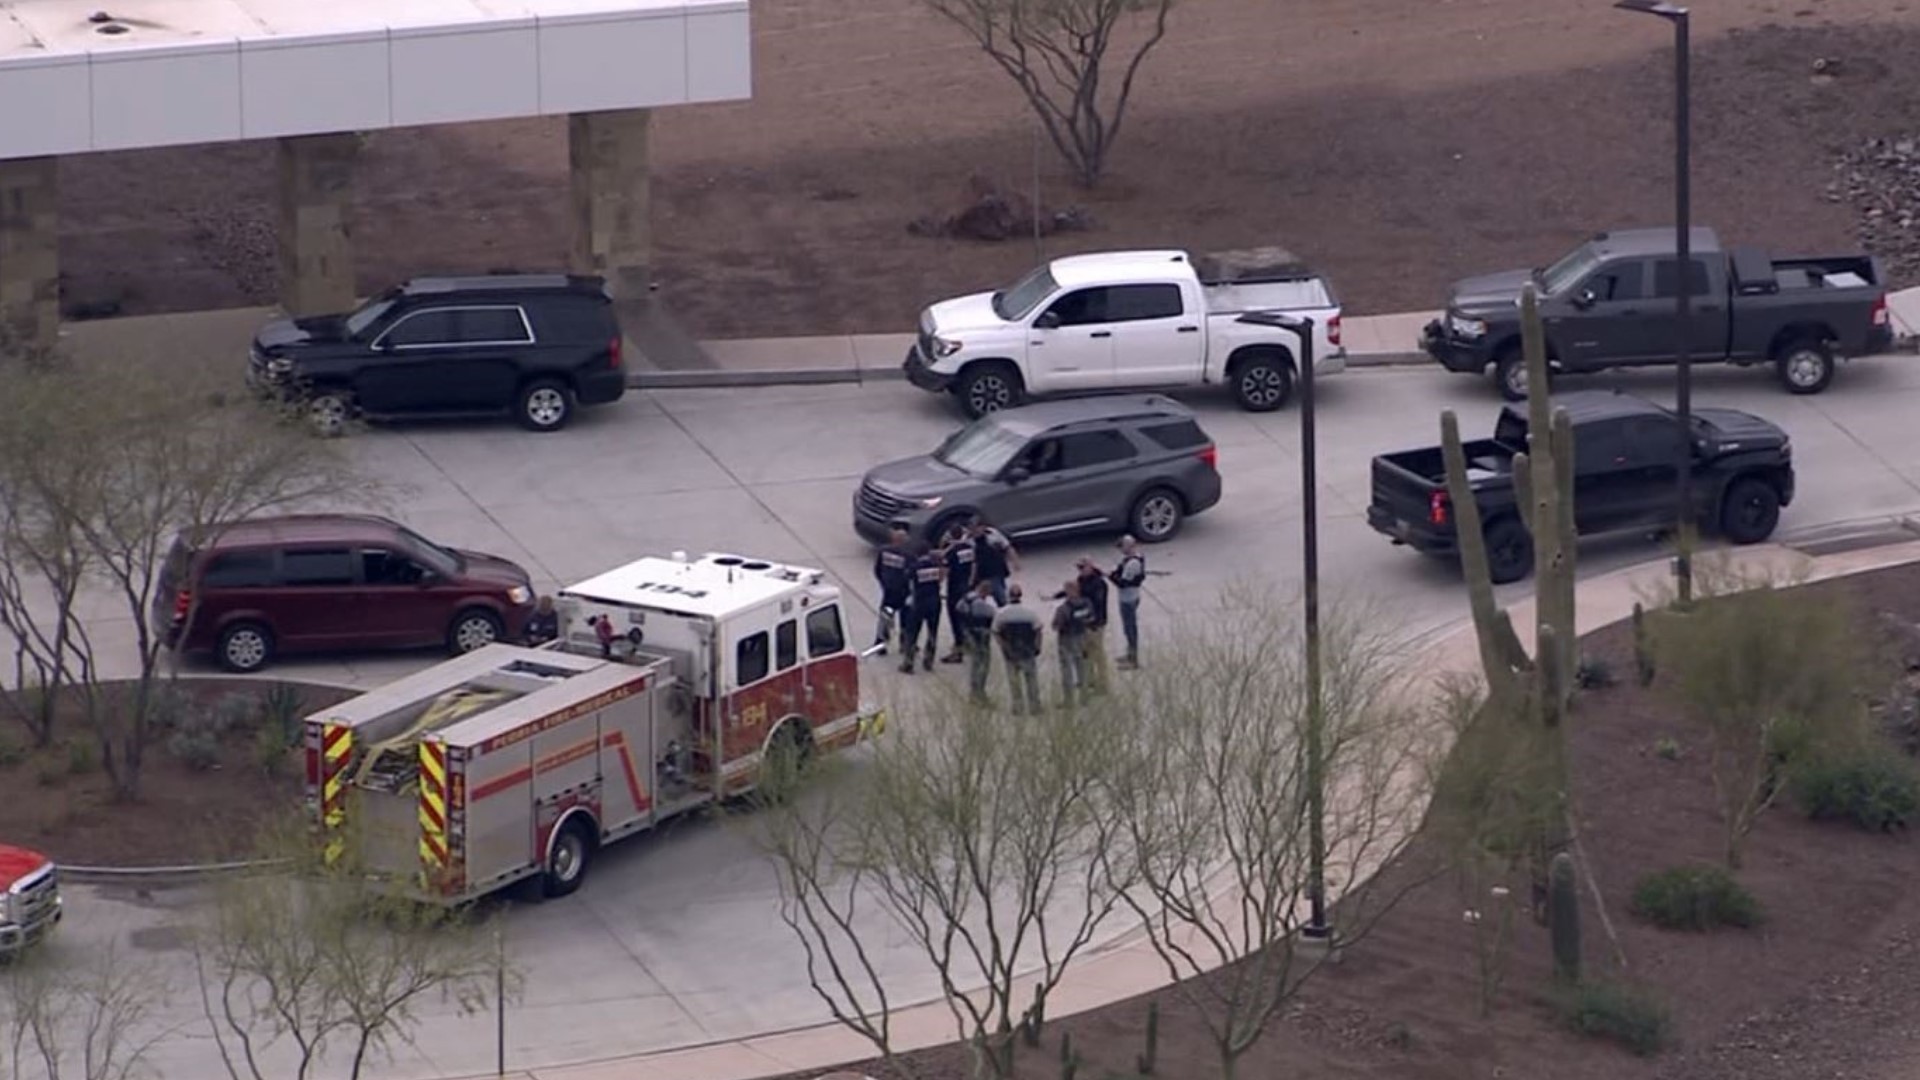 A suspect has been arrested in Mesa after leading police on a chase, according to authorities.